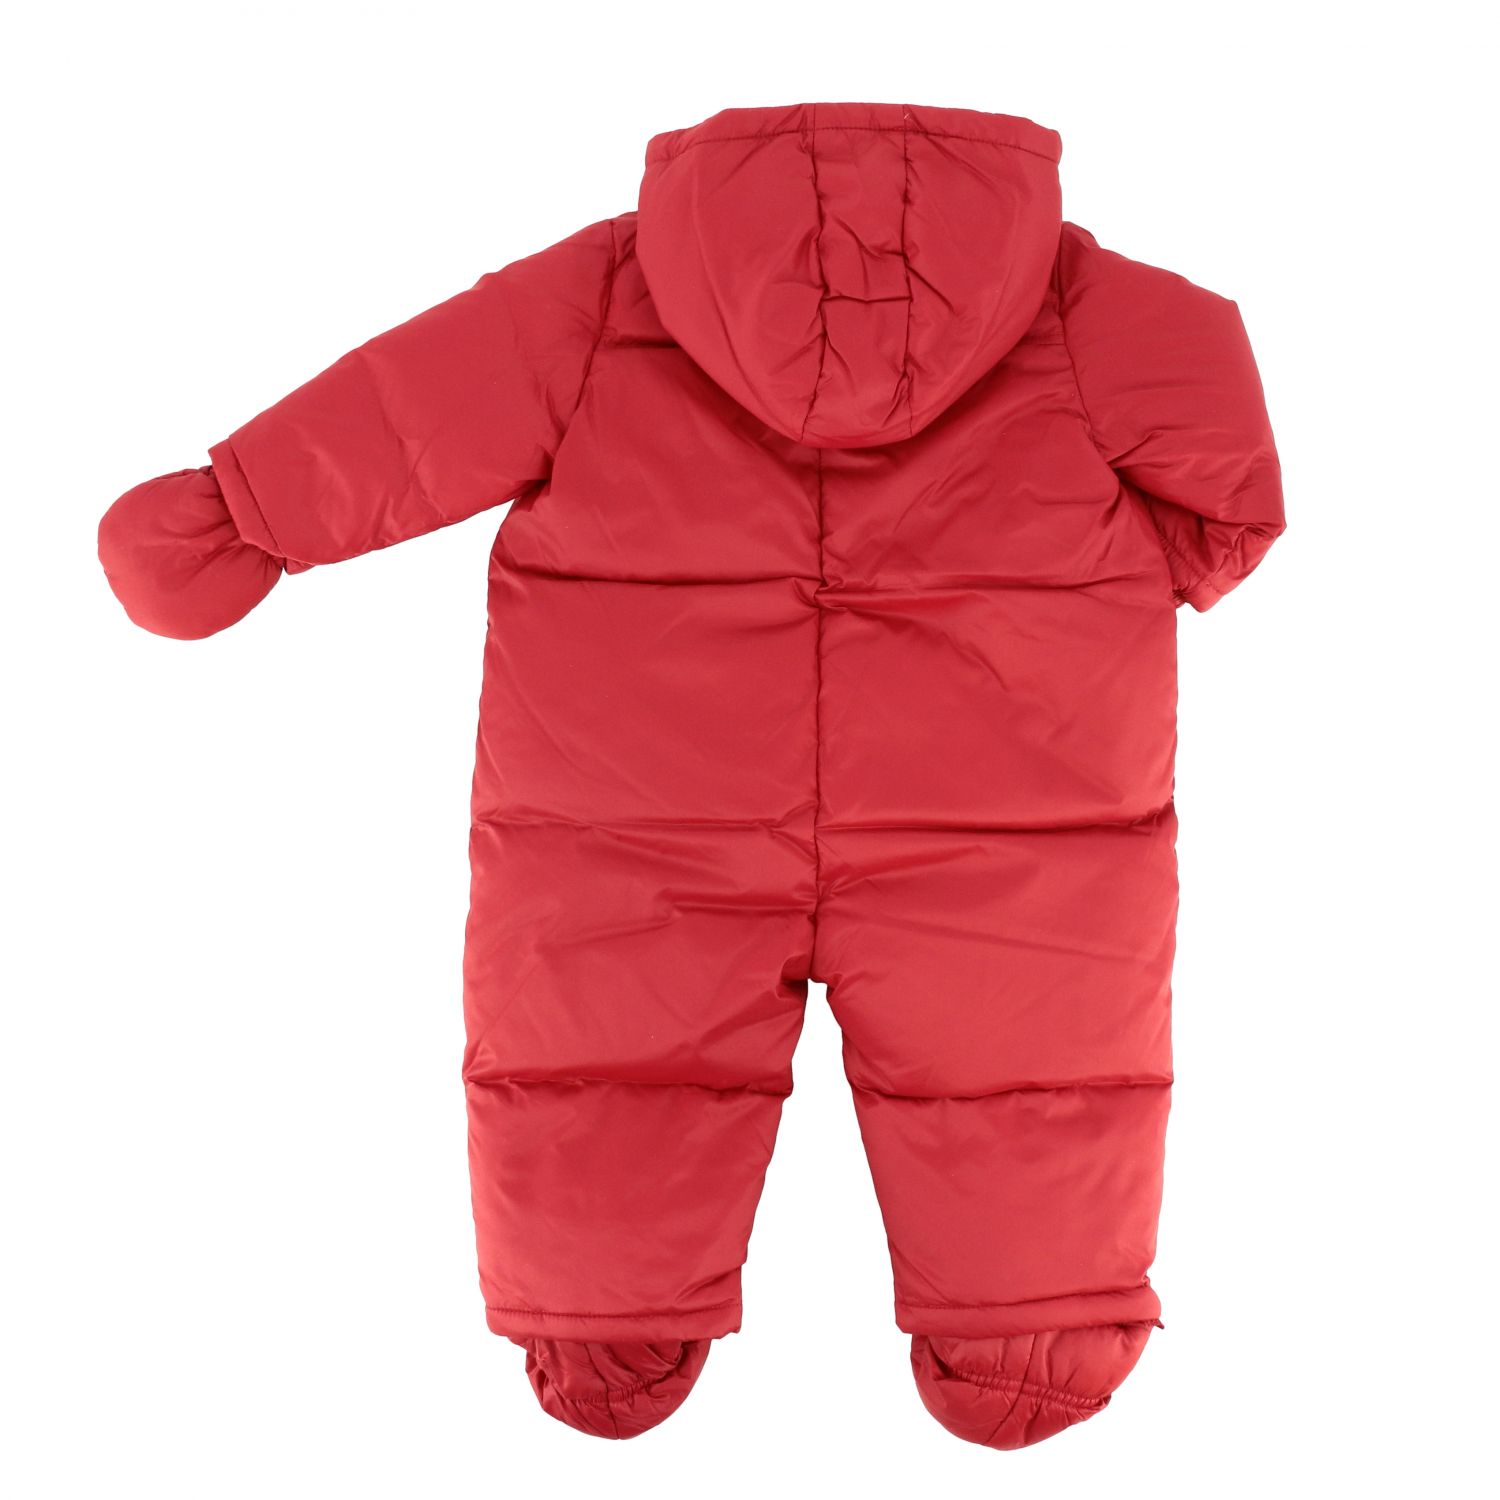 Emporio Armani Outlet: Tracksuit kids - Red | Tracksuits Emporio Armani ...